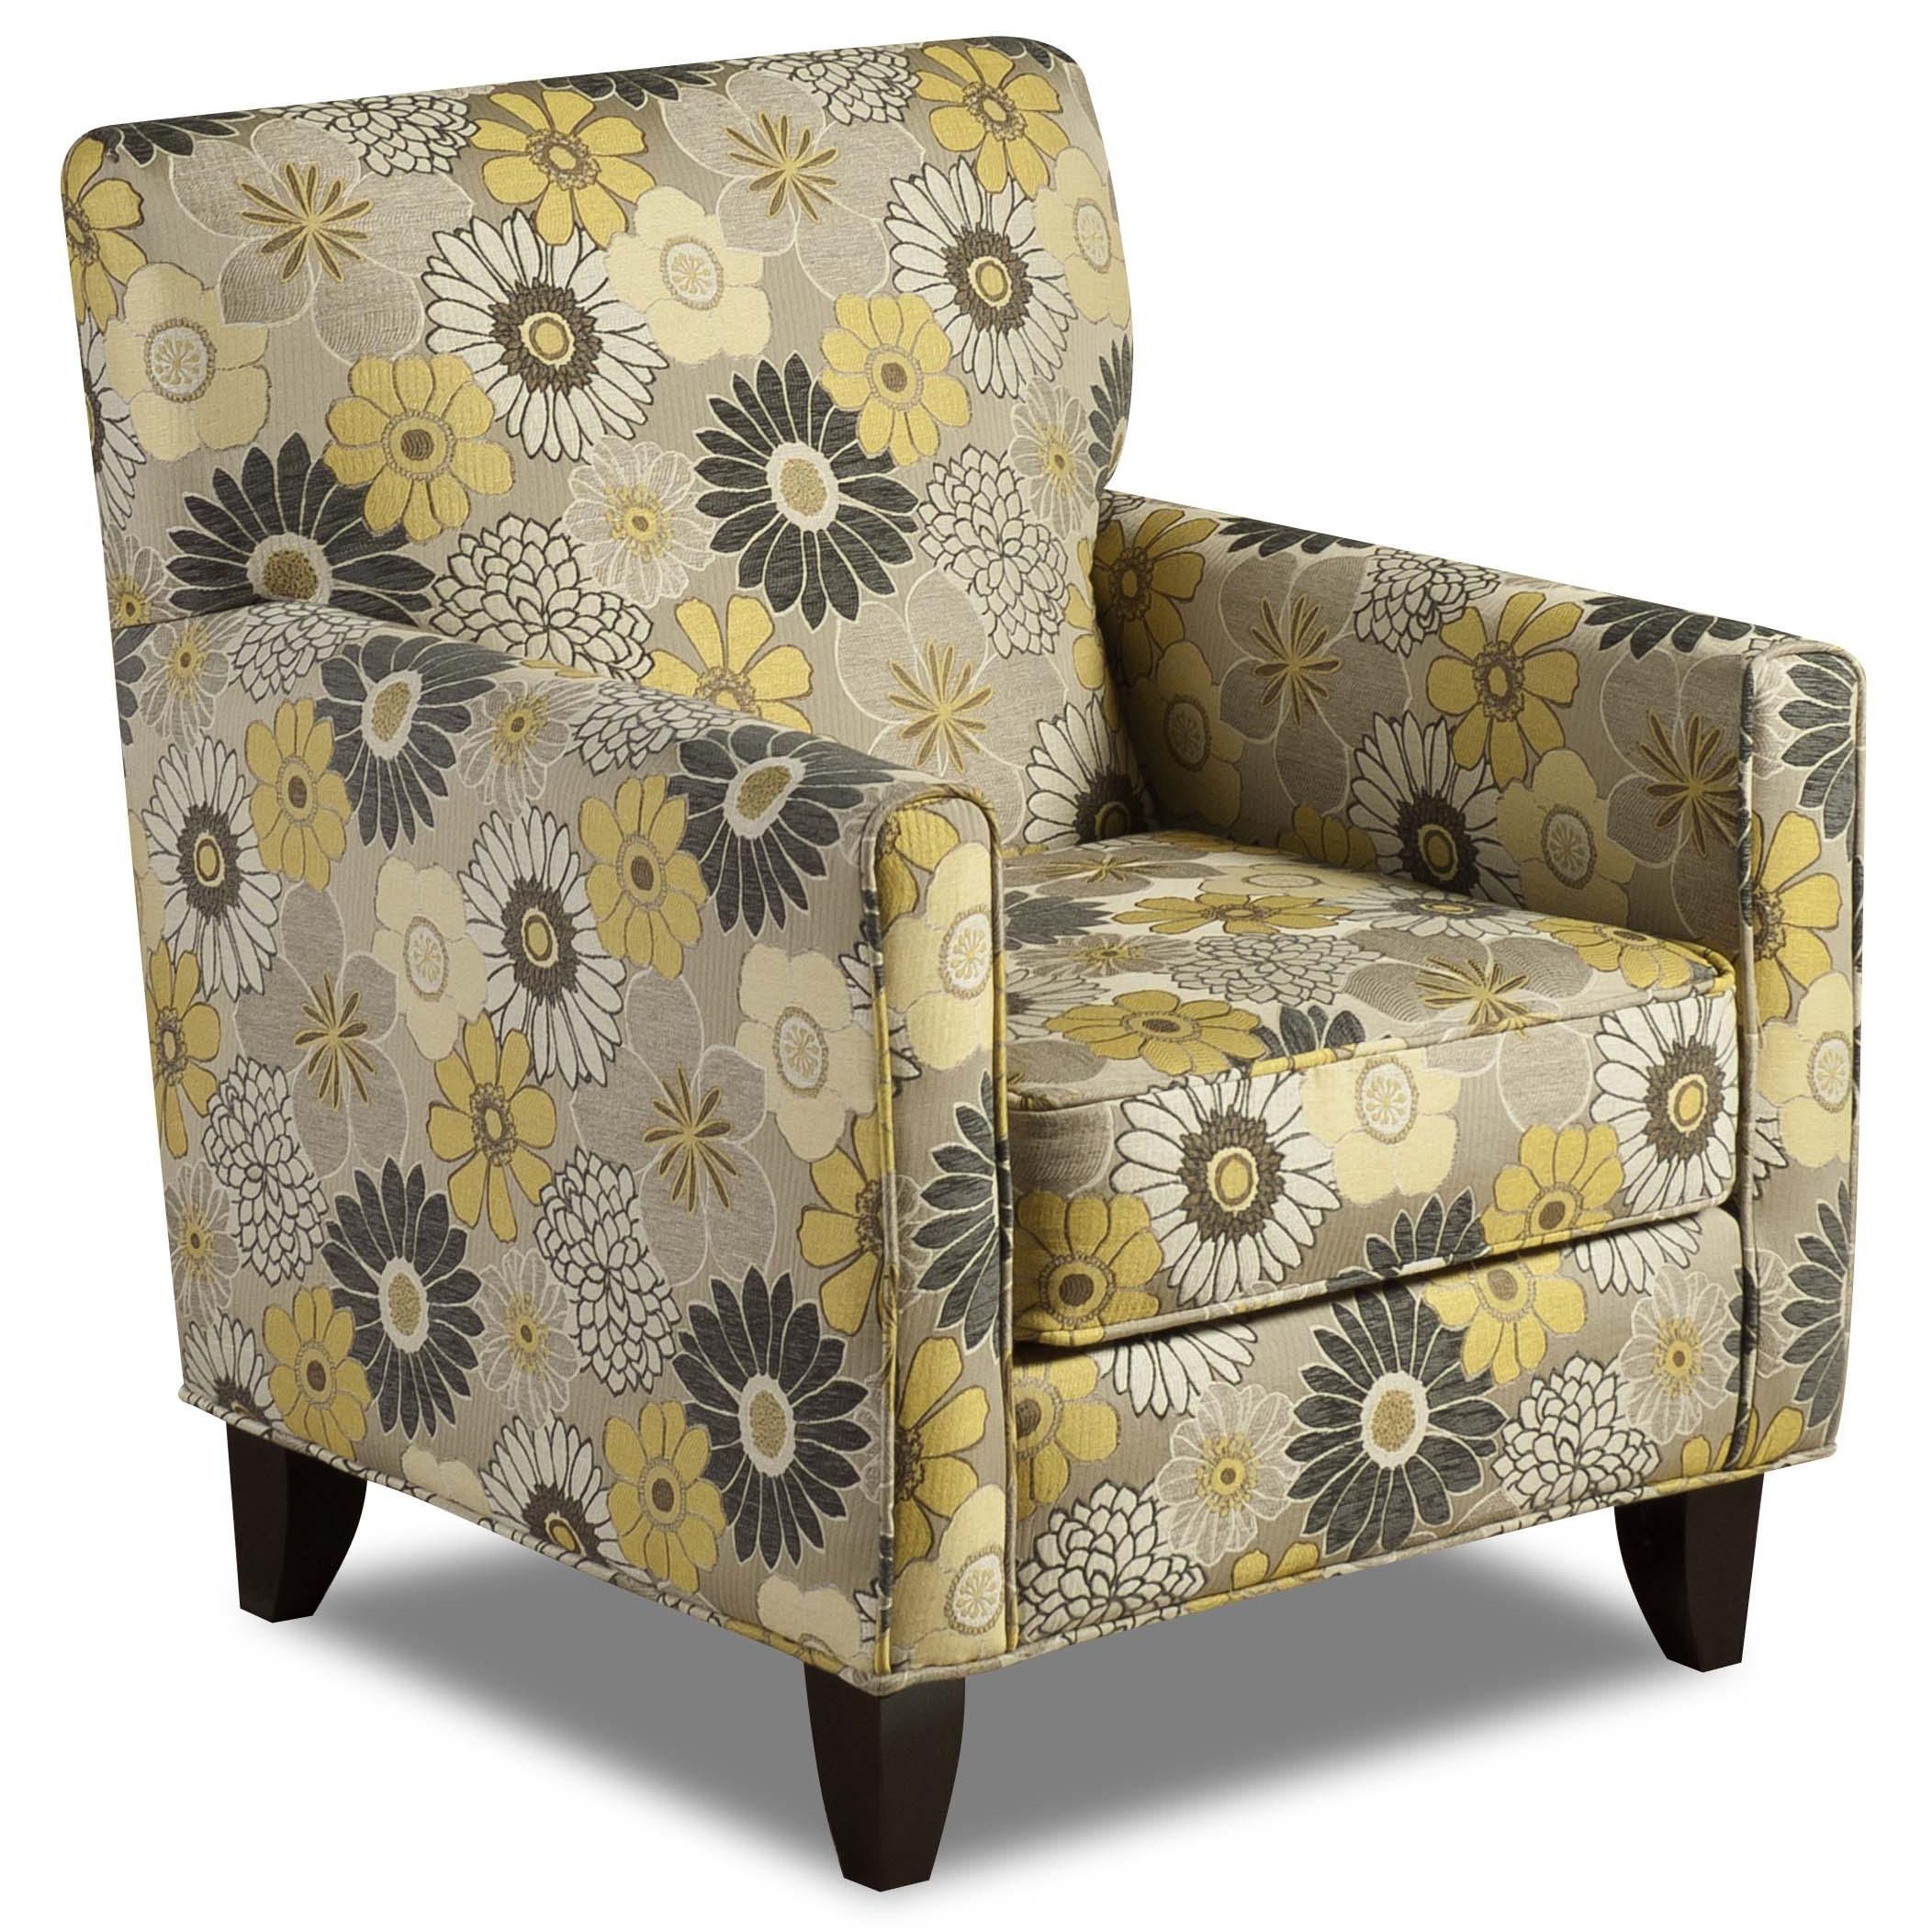 702 – Floral Splash Gray Accent Chairfusion Furniture | Fusion Intended For Satin Gray Wood Accent Stools (View 16 of 20)